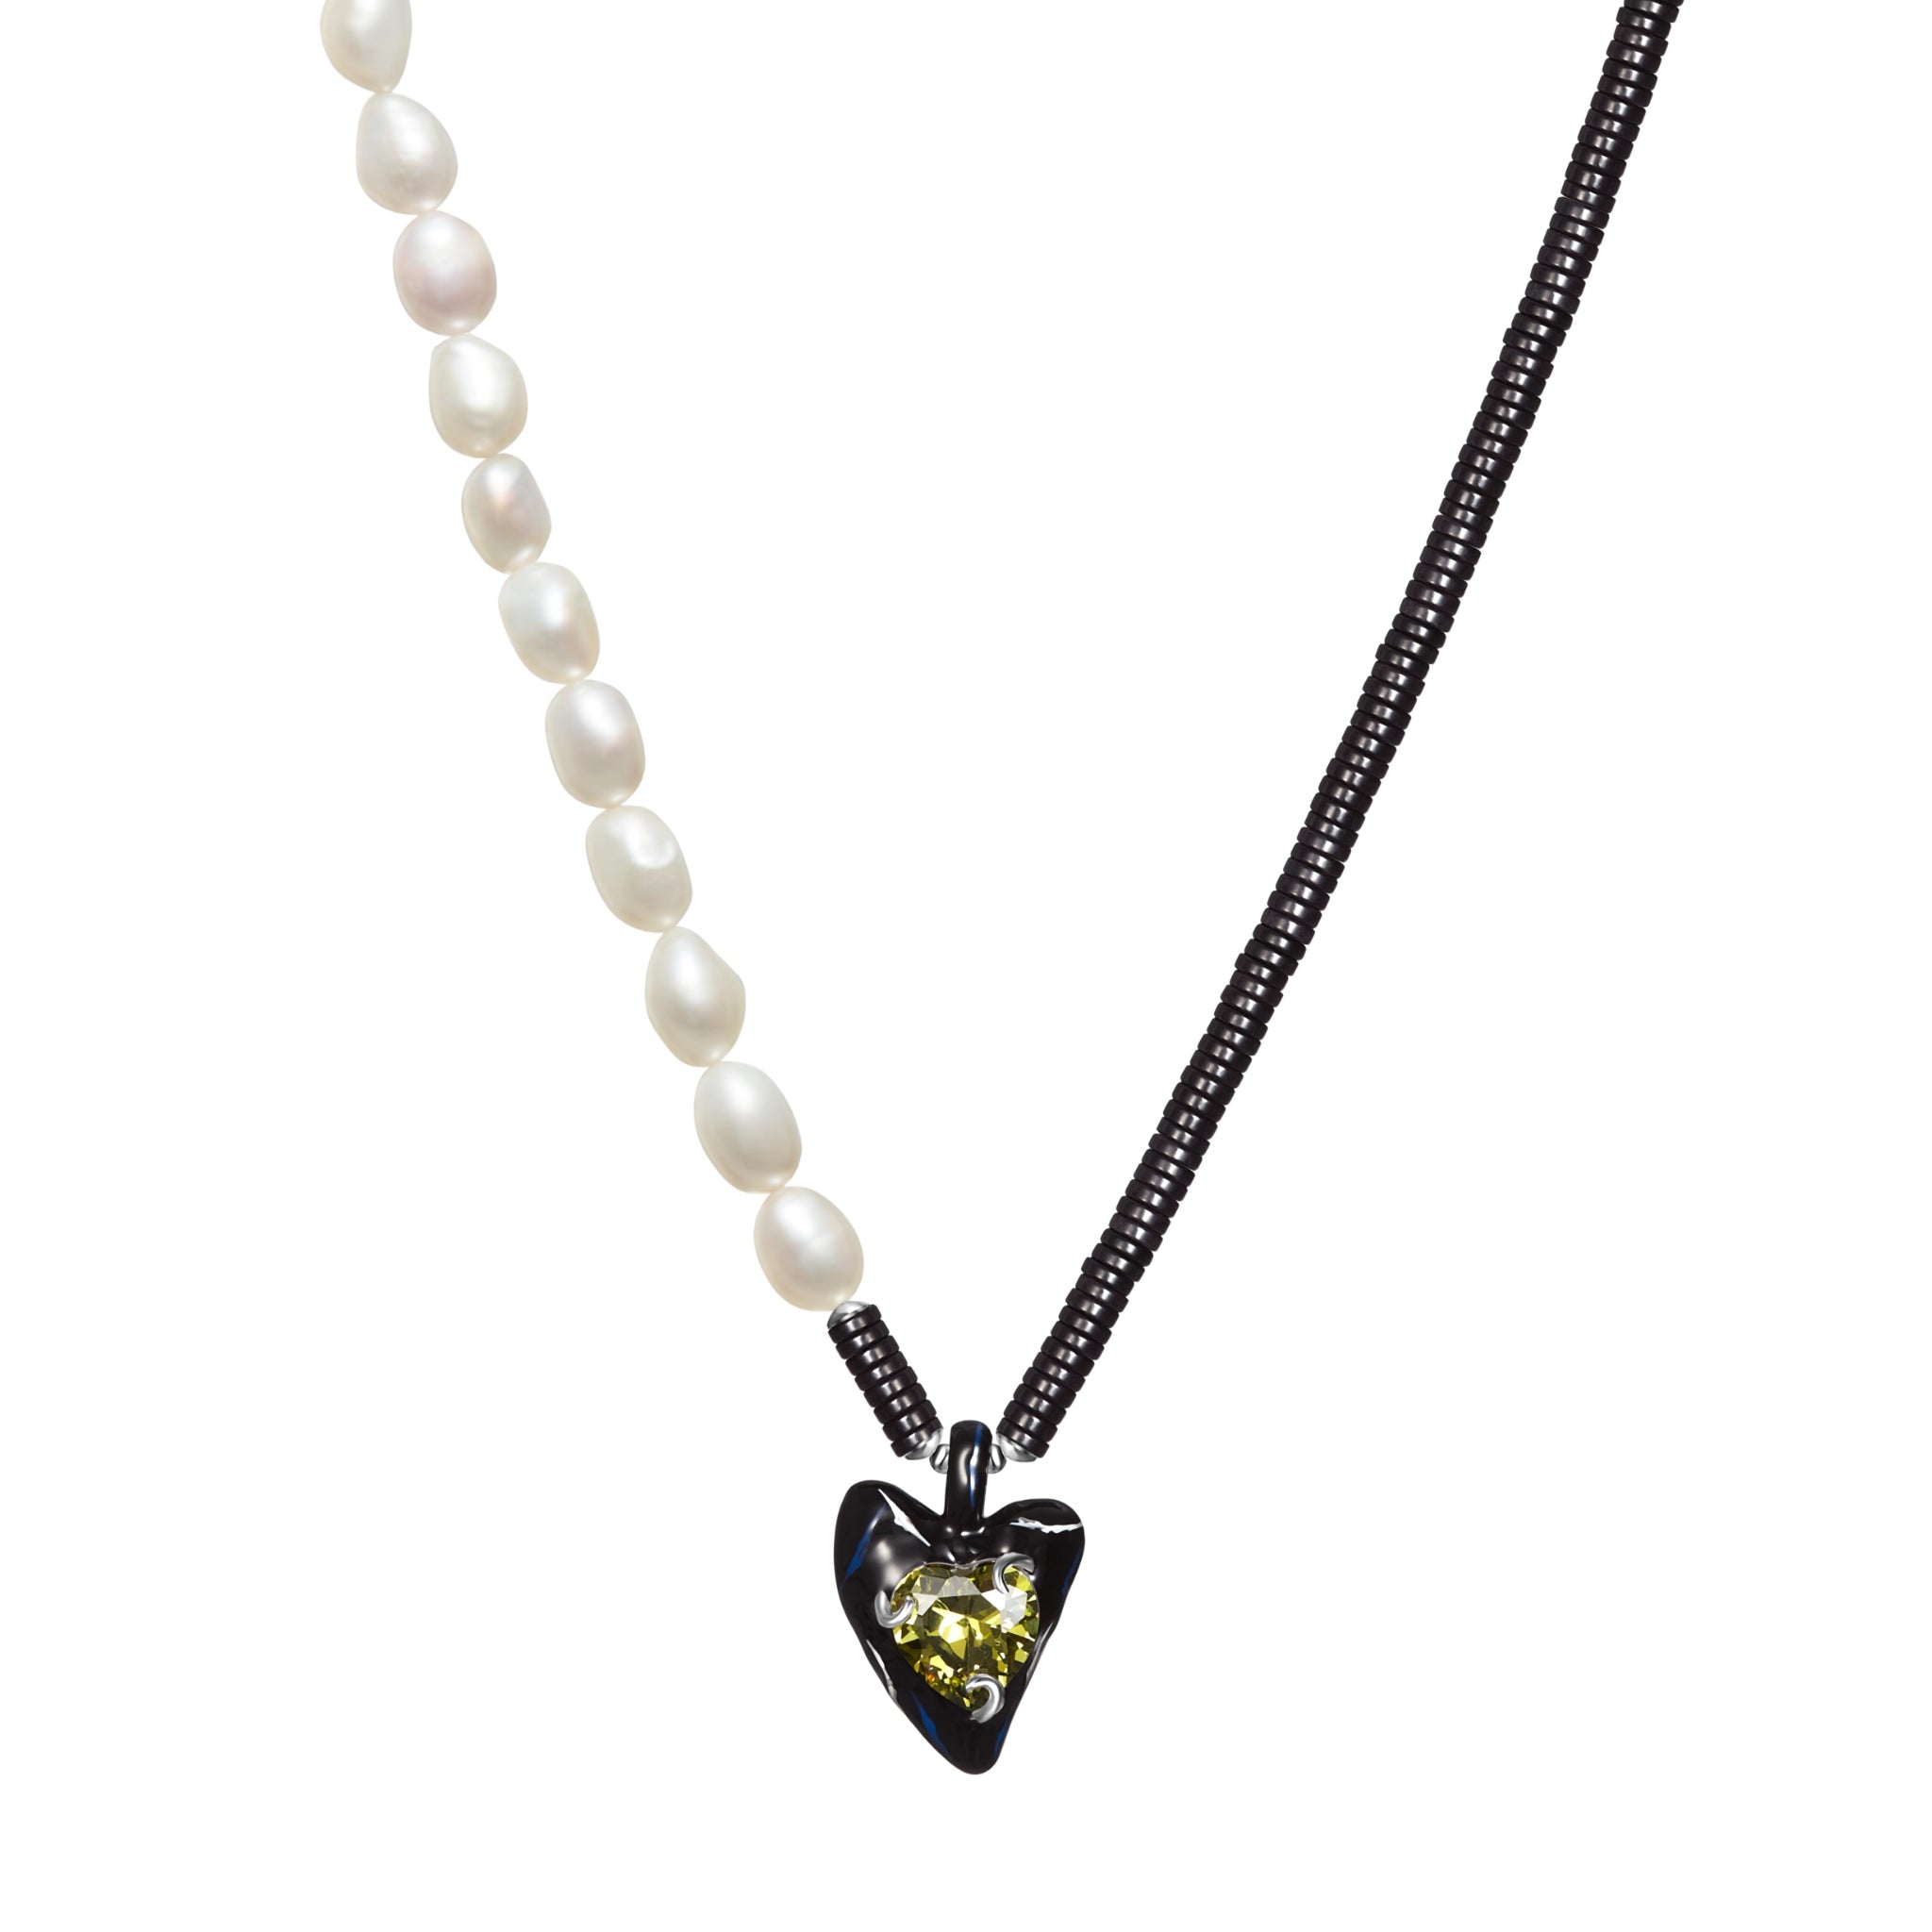 LOST IN ECHO Black Heart Enamel Pearl Necklace | MADA IN CHINA